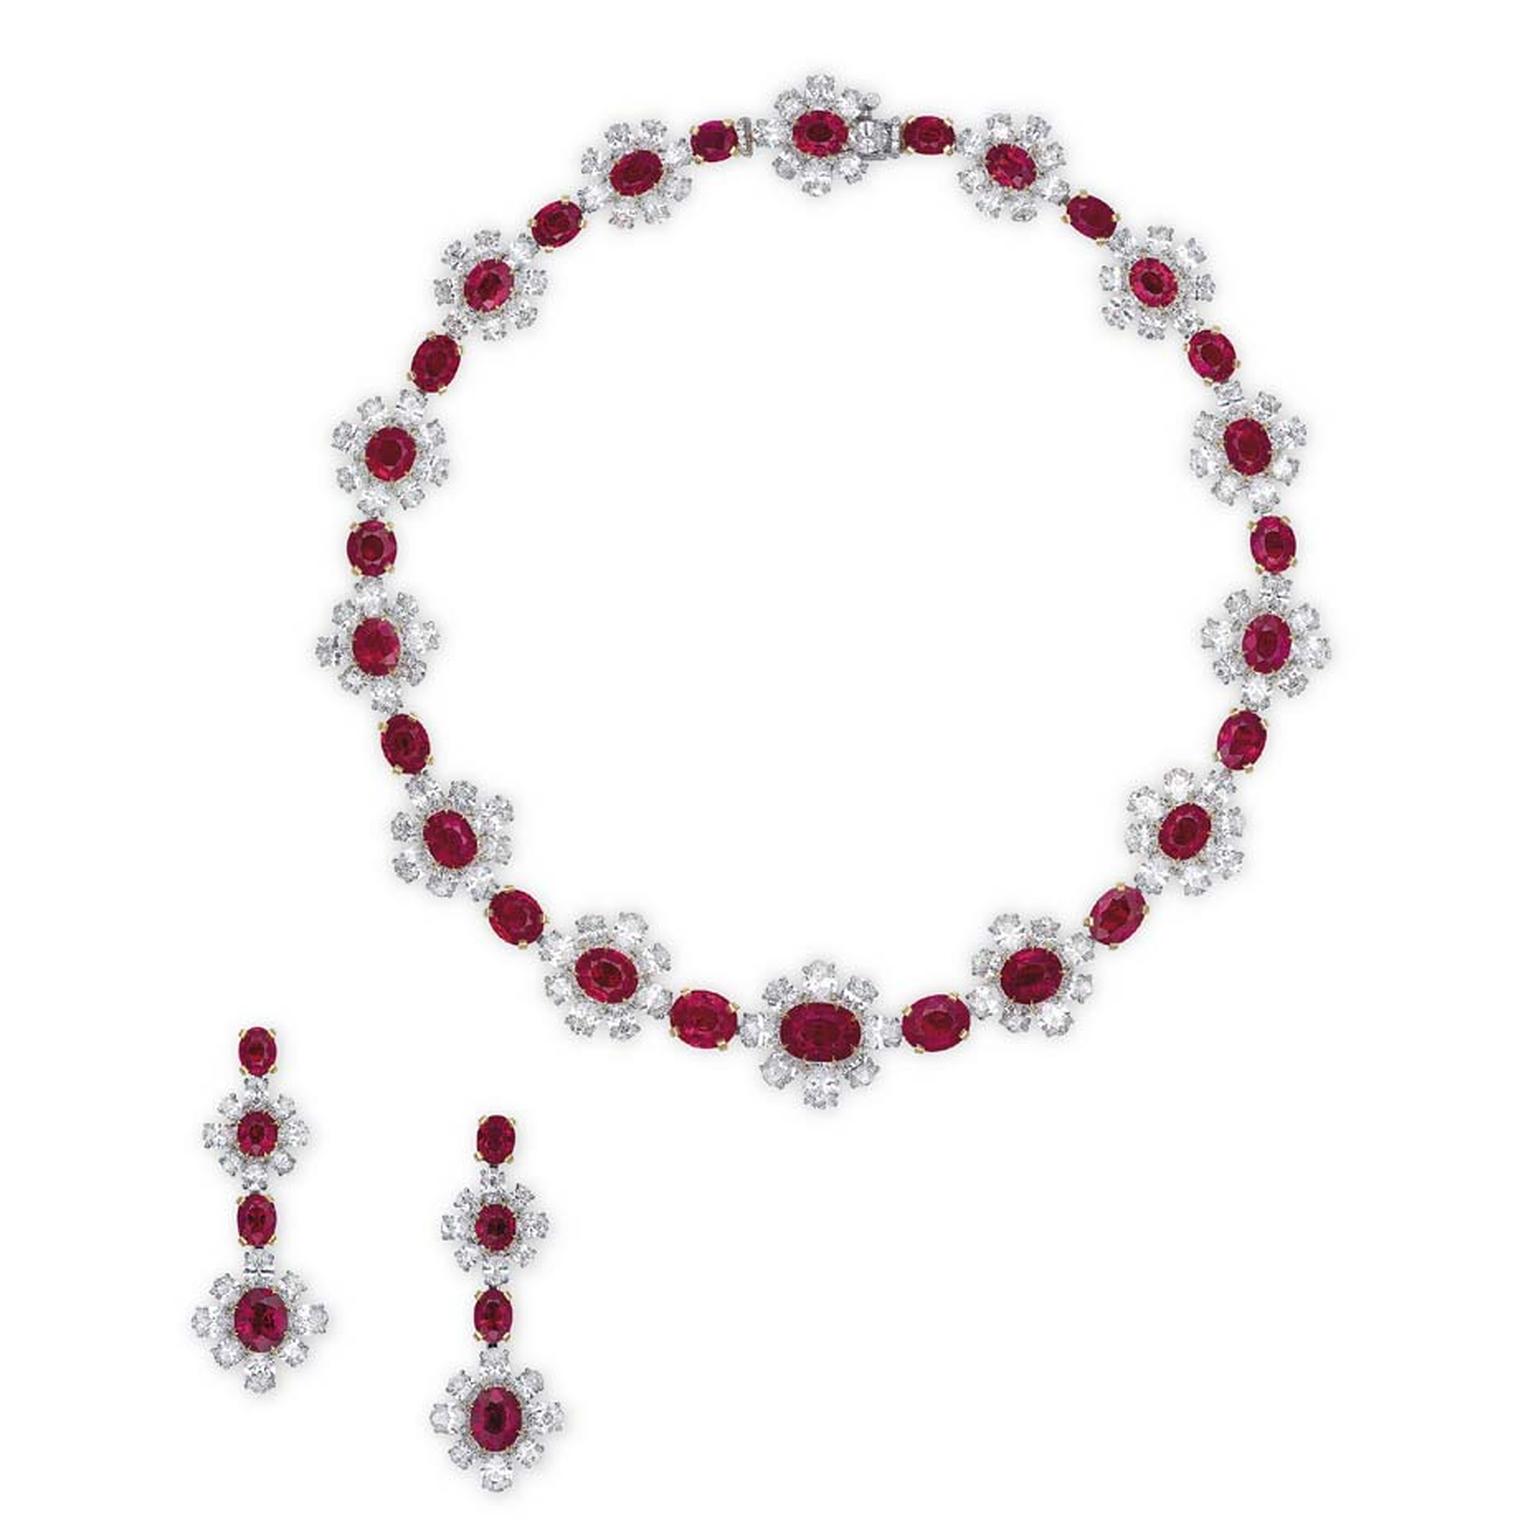 Burmese pigeon’s blood red ruby and diamond jewellery by James W. Currens for Faidee (estimate: US$4-6.25 million)